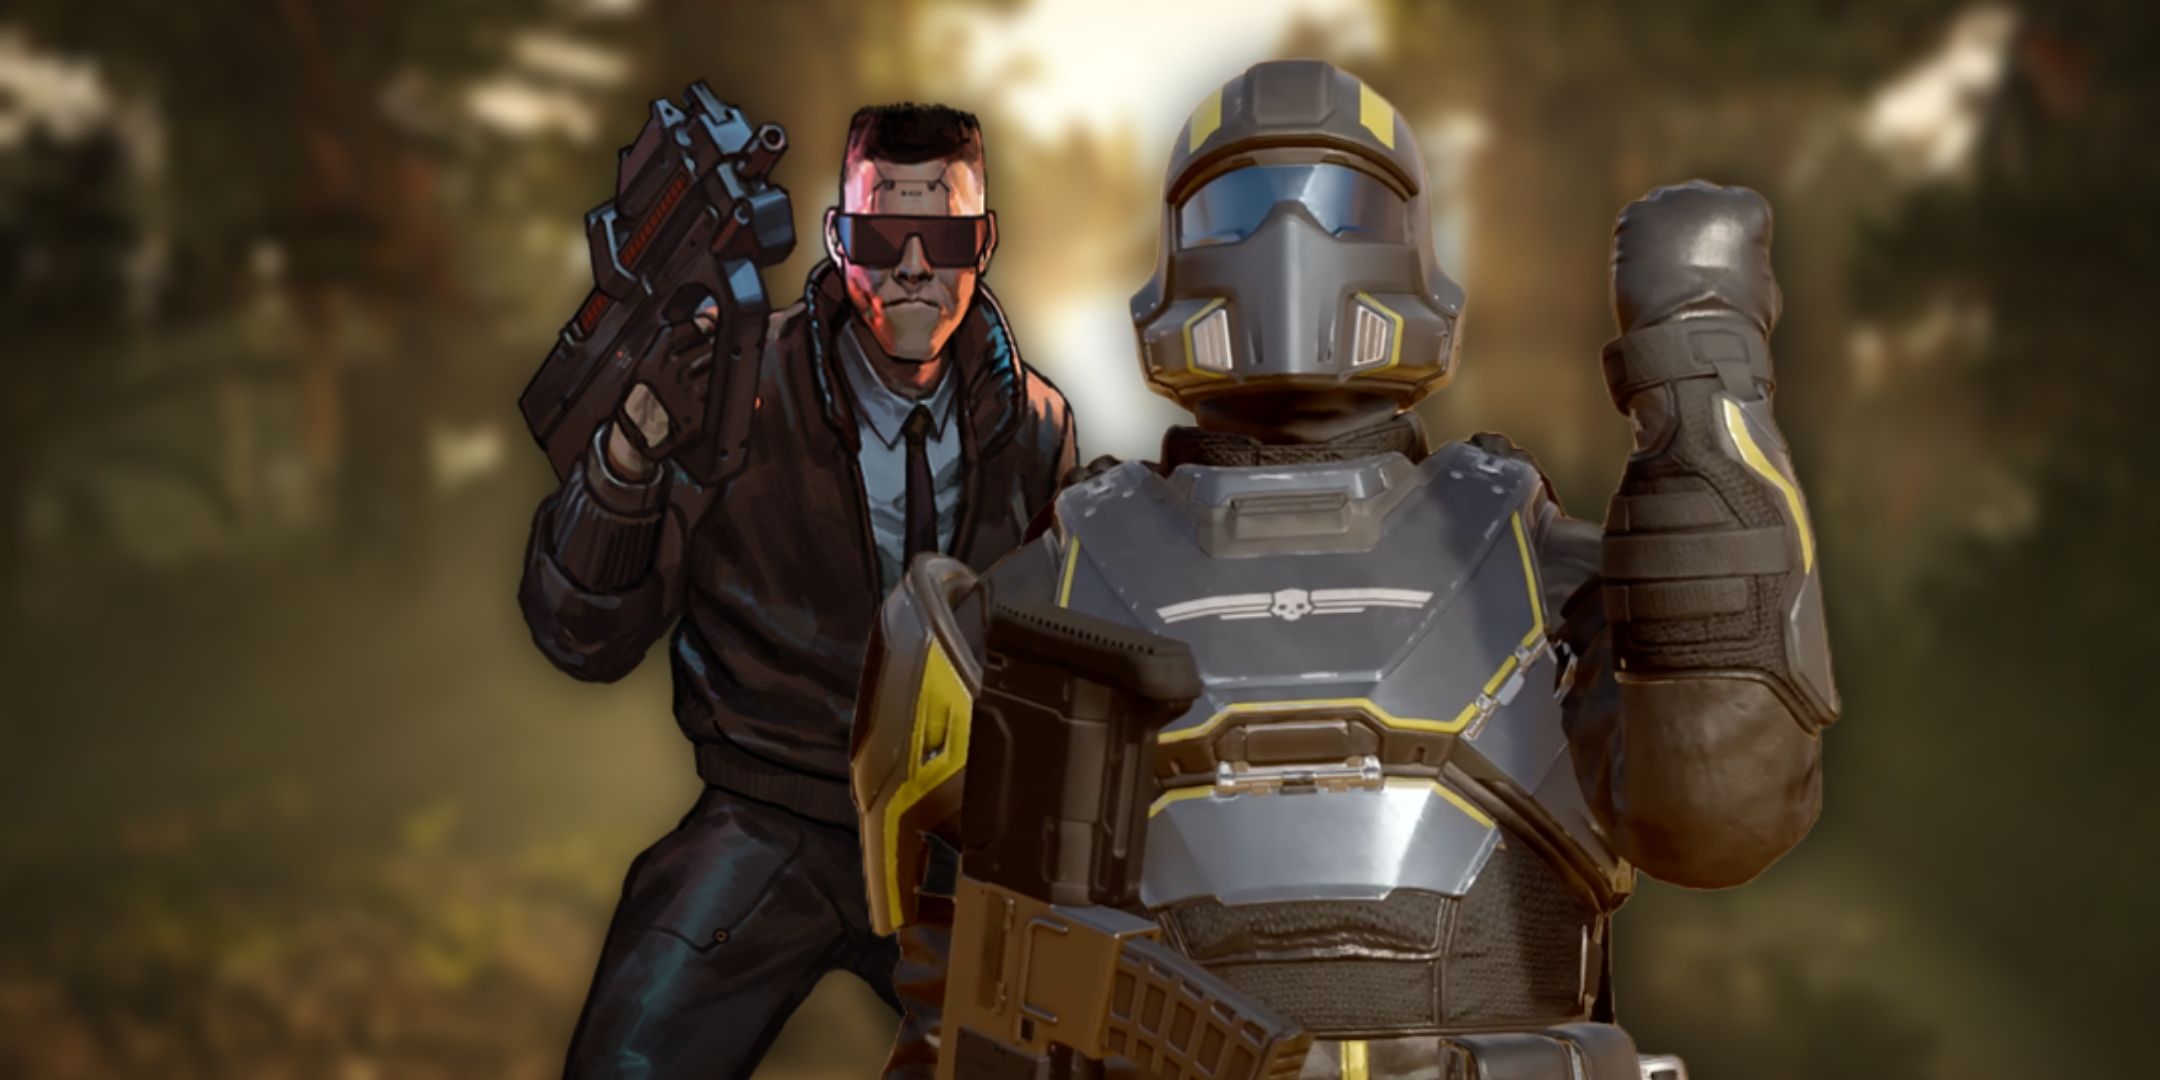 Lead Characters of Helldivers and Ruiner stand in front of a blurred out forest